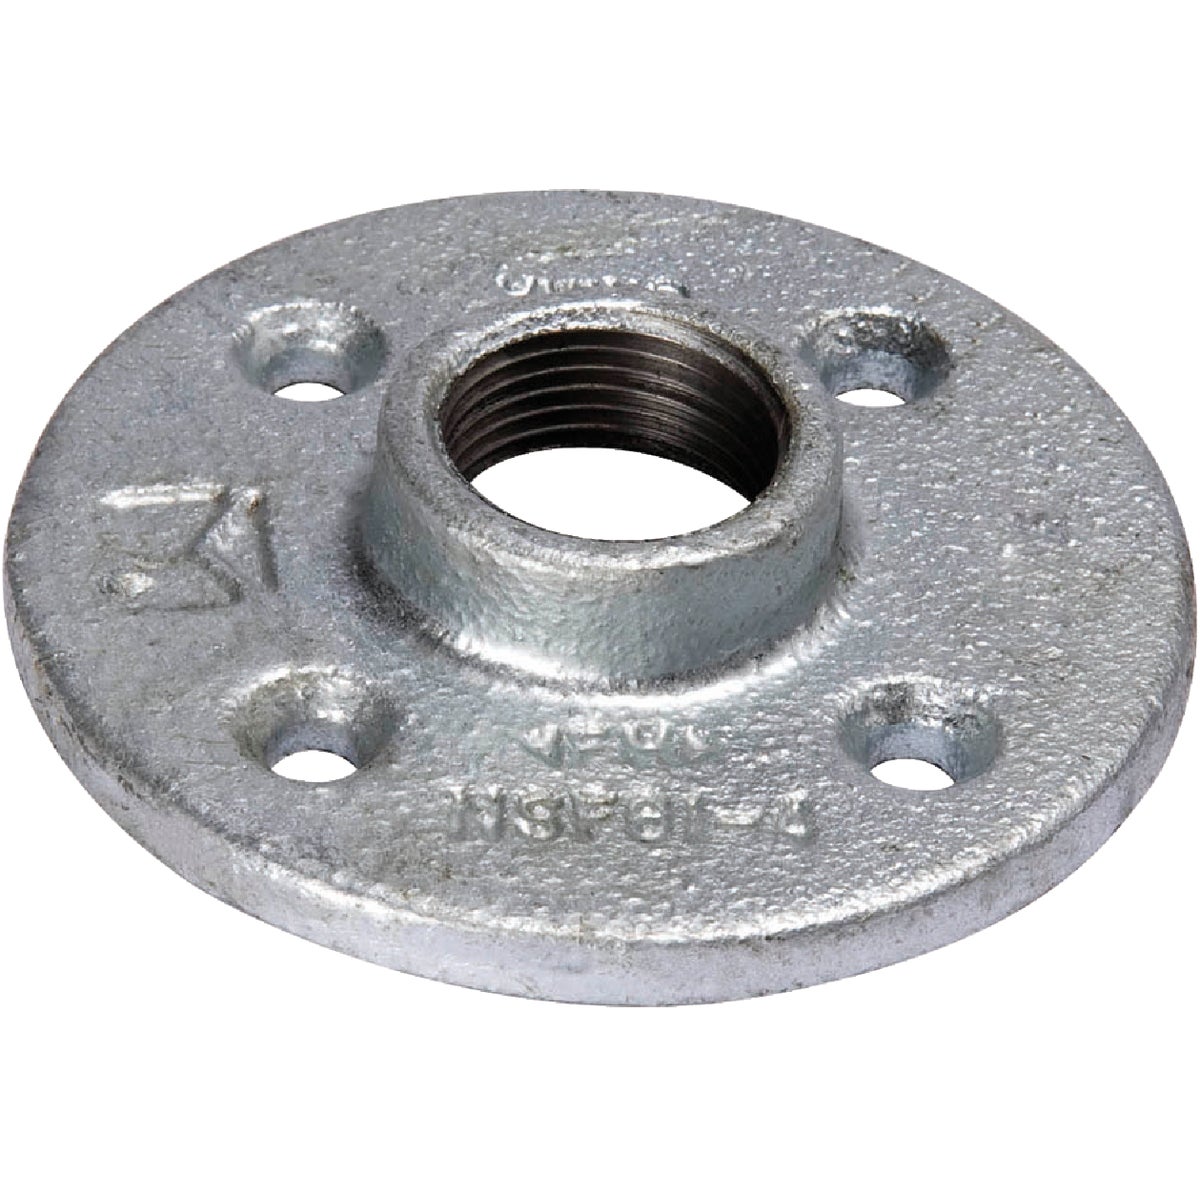 Southland 3/4 In. Malleable Iron Galvanized Floor Flange